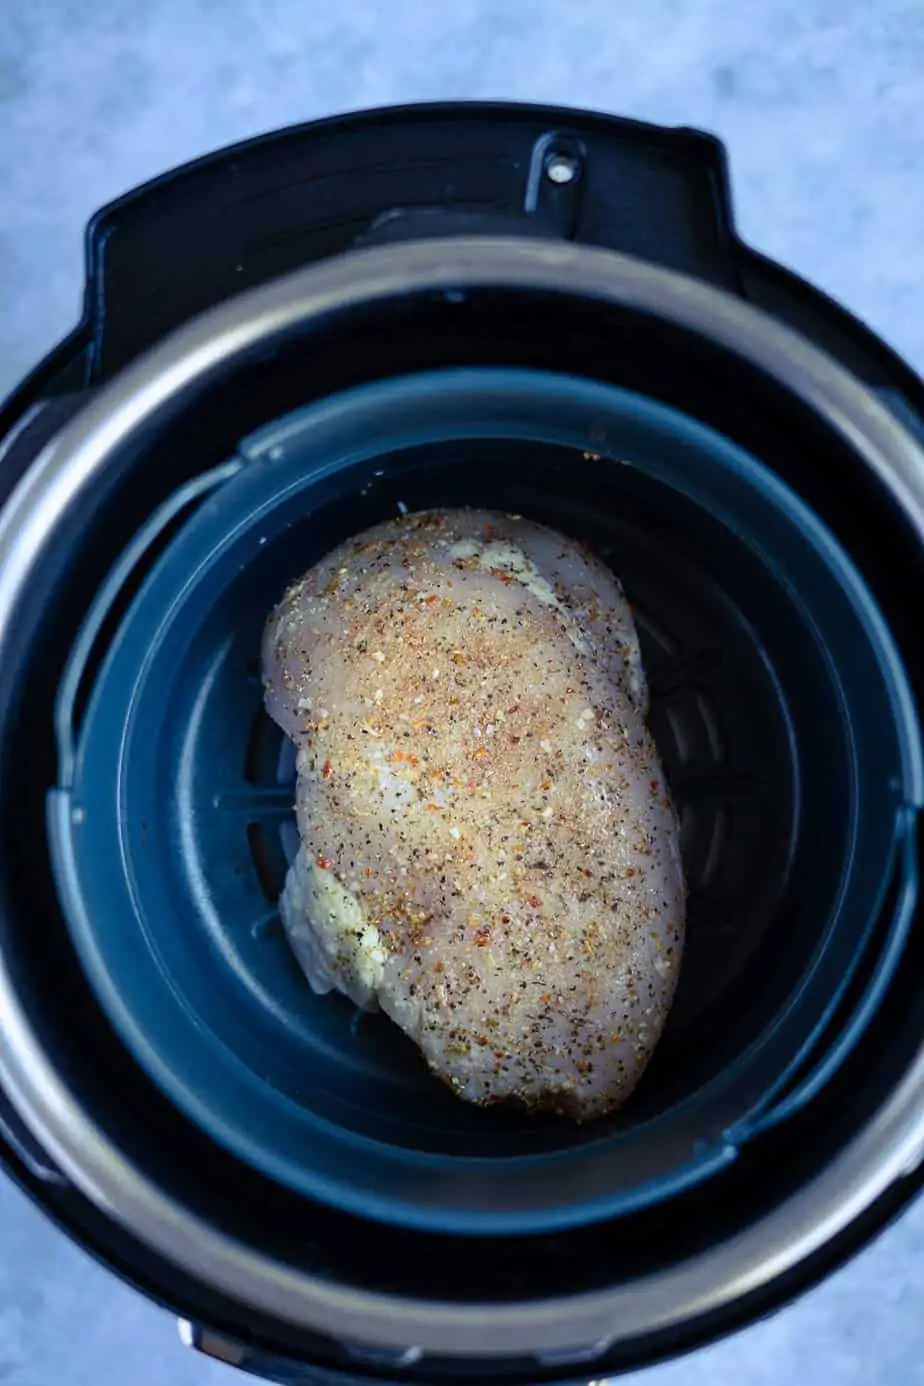 cooking frozen chicken breast in the air fryer with a salt free seasoning and salt to taste inside the air fryer basket.